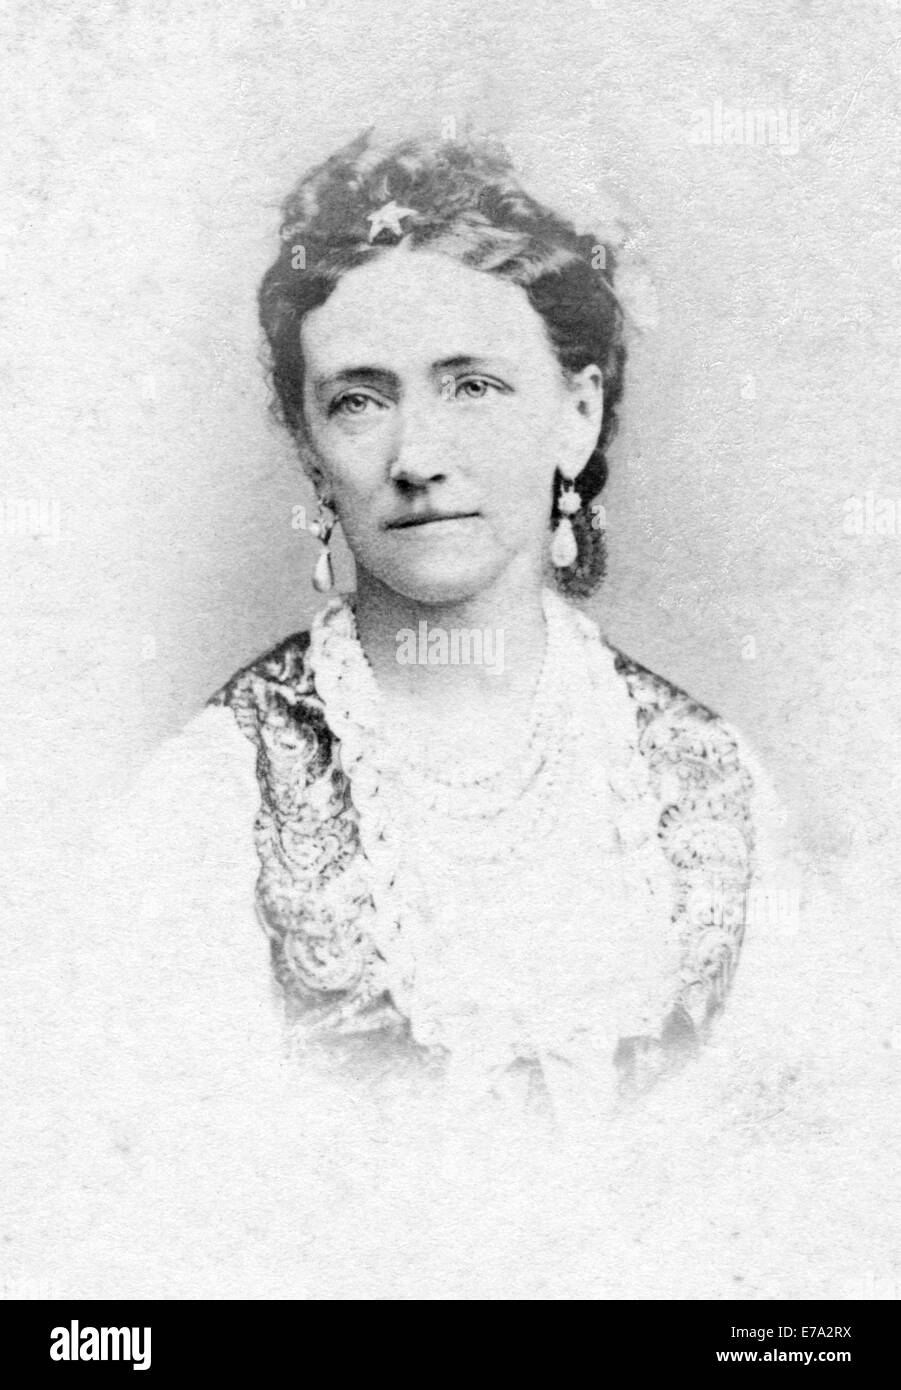 Louise of Hesse-Kassel (1817-1898), Wife and Queen Consort to King Christian IX of Denmark, Portrait, Pocket Card, circa 1866 Stock Photo